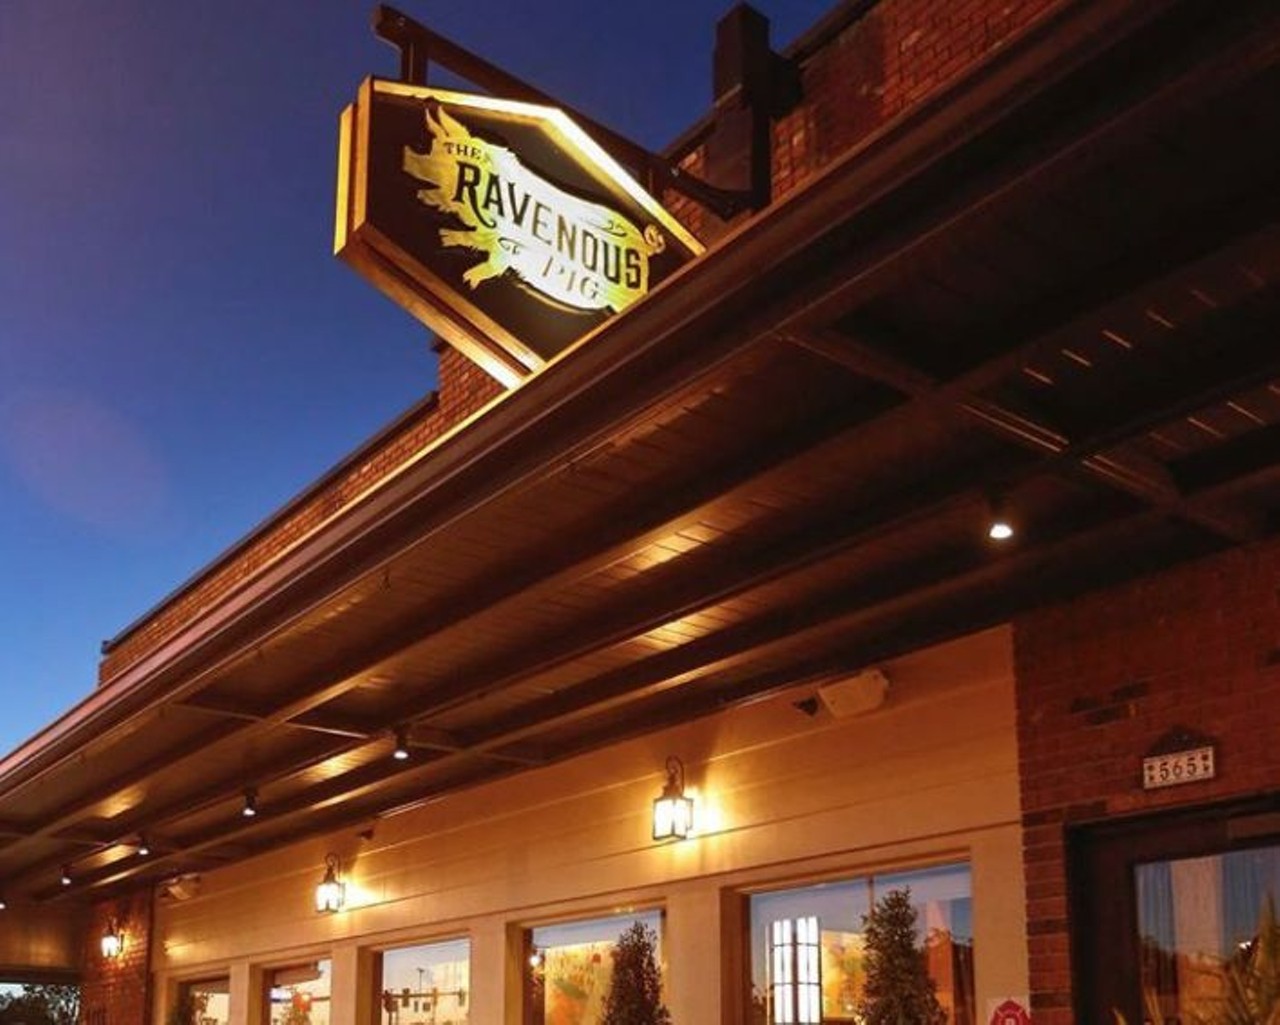 The Ravenous Pig  
565 W Fairbanks Ave, Winter Park, 407-628-2333
Winter Park's upscale eatery also is one of the better places to score some serious BBQ, specifically at their monthly pig roasts. 
Photo via theravenouspig/ Instagram